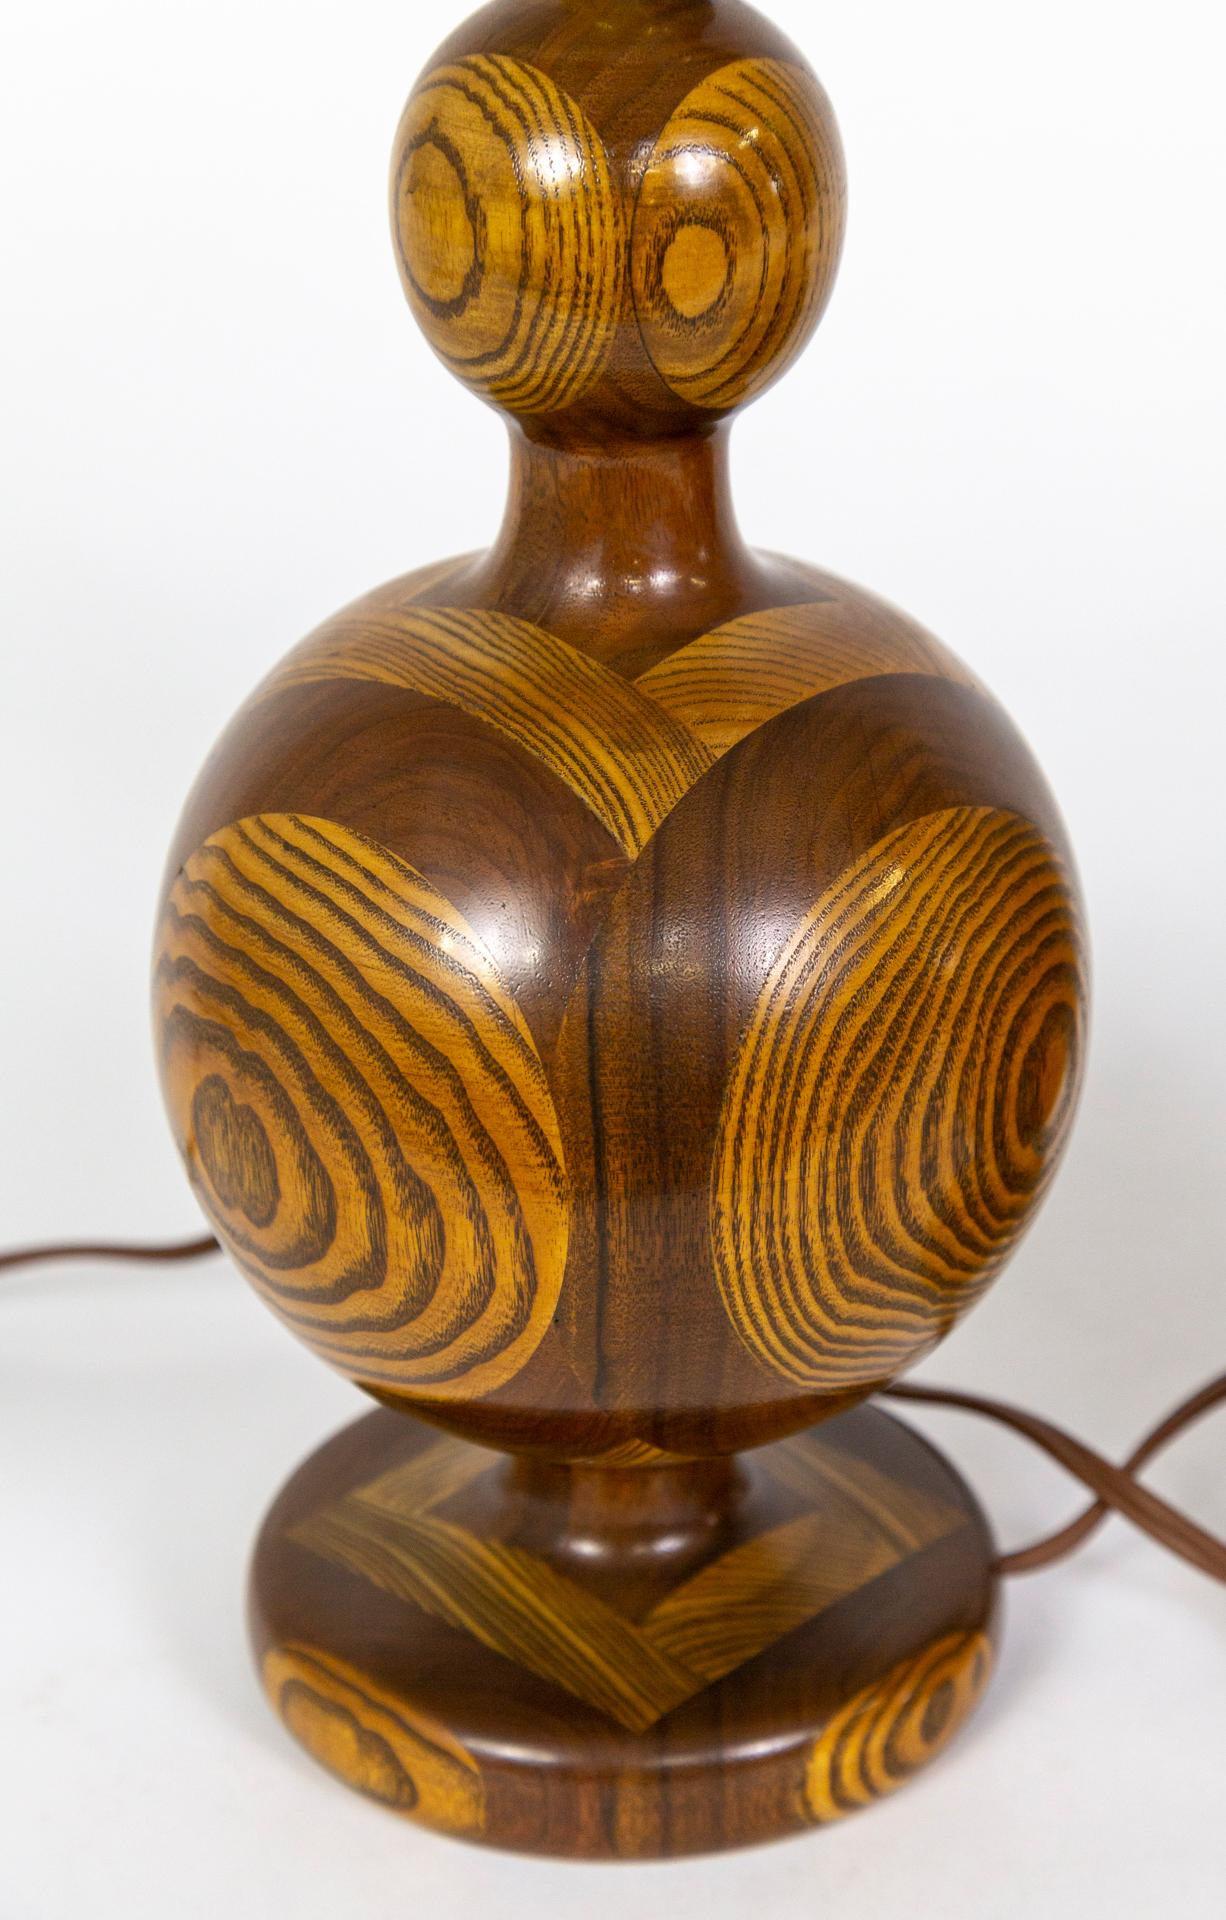 Segmented 'Inlaid-Esque' Turned Walnut/Cherry Wood Lamps, Pair 6